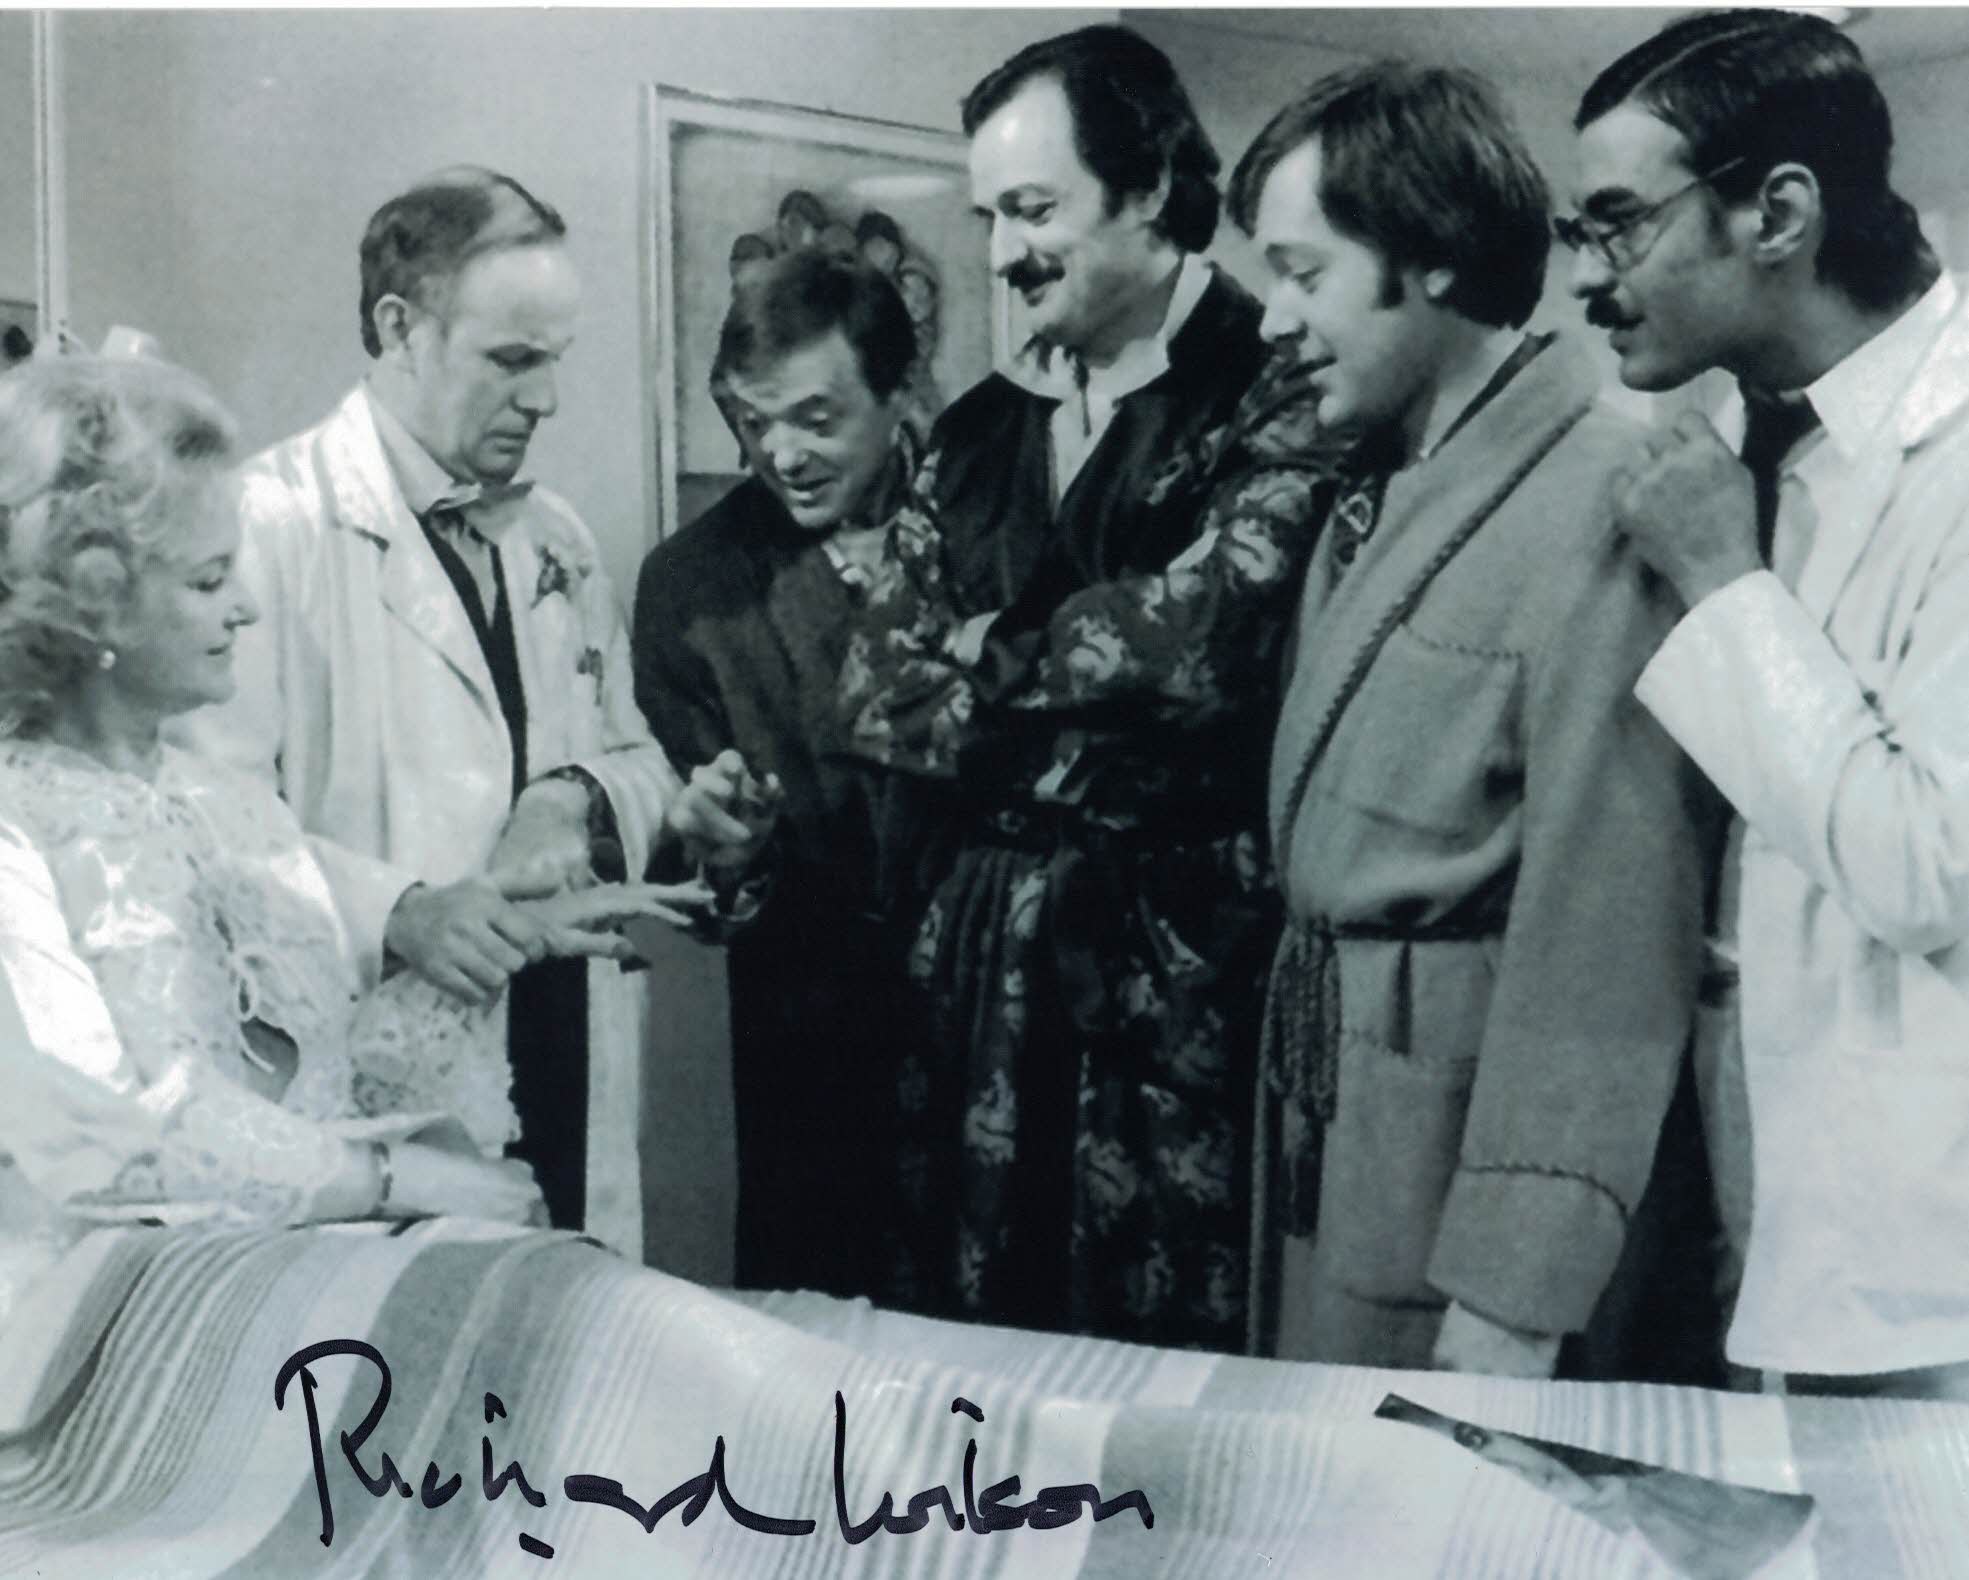 RICHARD WILSON - Gordon Thorpe in Only When I Laugh - hand signed 10 x 8 photo